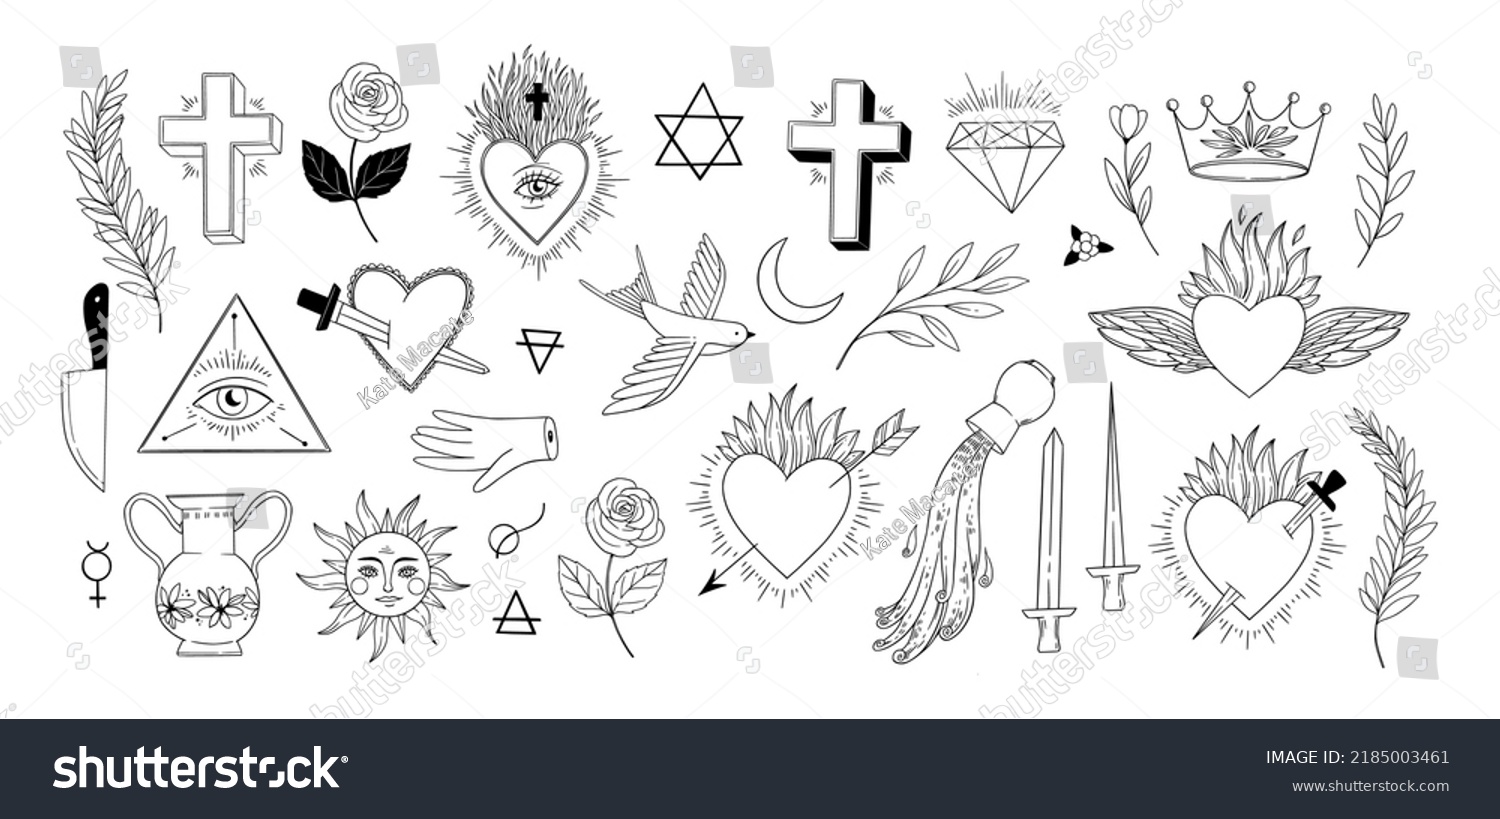 SVG of Linear alchemy design elements. Vintage hearts, all seeing eye, cross, rose, space and botanical elements. Magic and occult illustrations. Old school tattoo. Perfect for logo, cards, prints, packaging svg